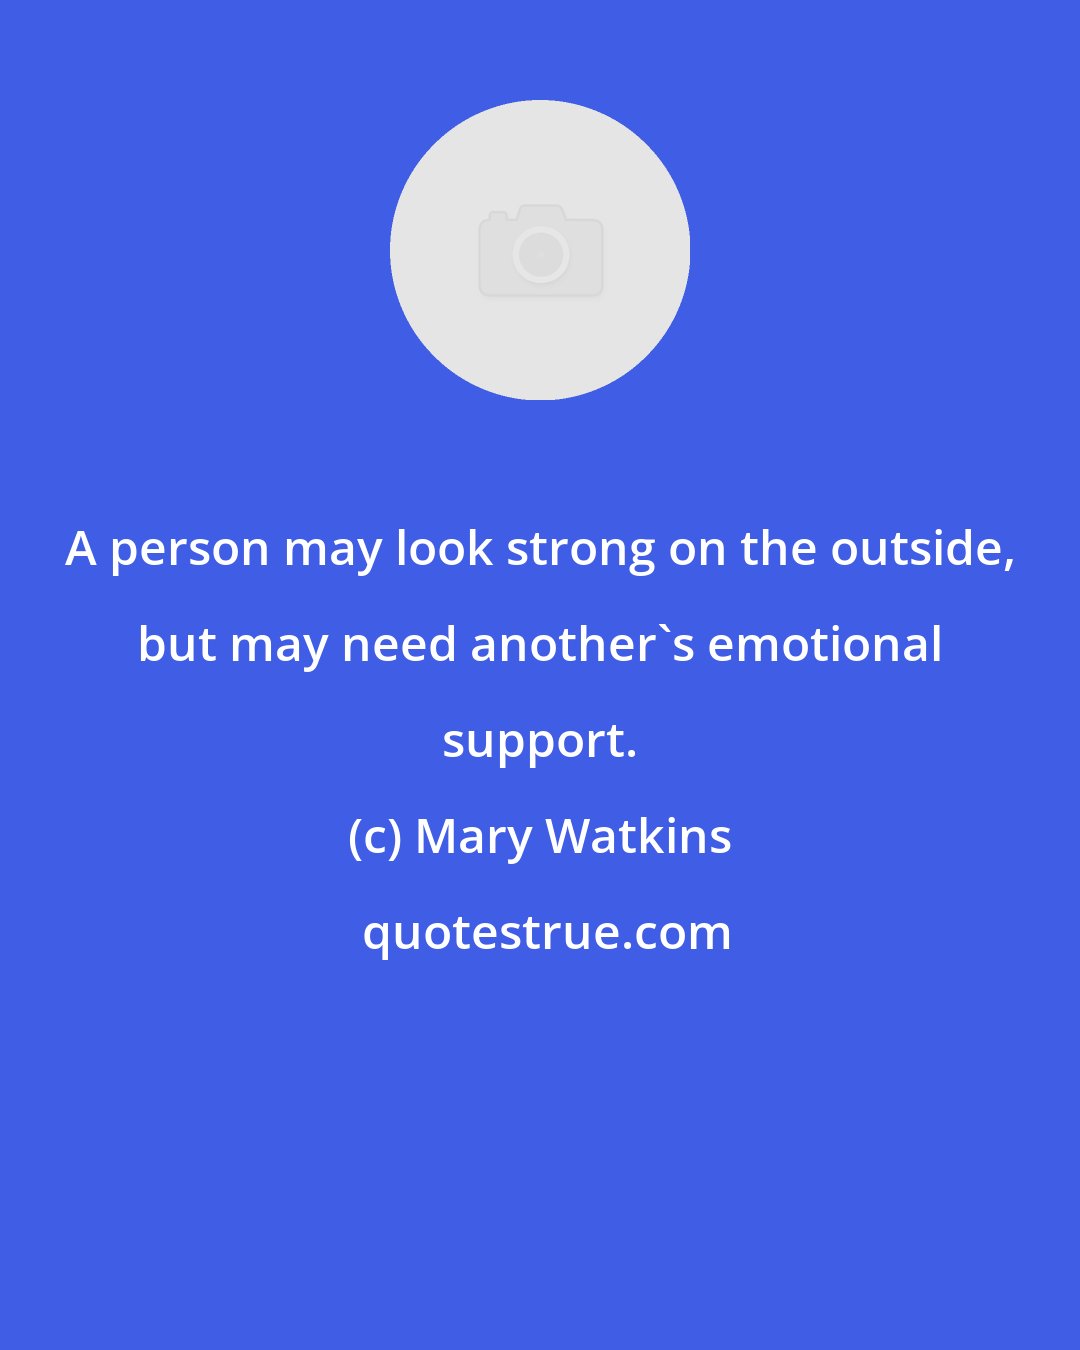 Mary Watkins: A person may look strong on the outside, but may need another's emotional support.